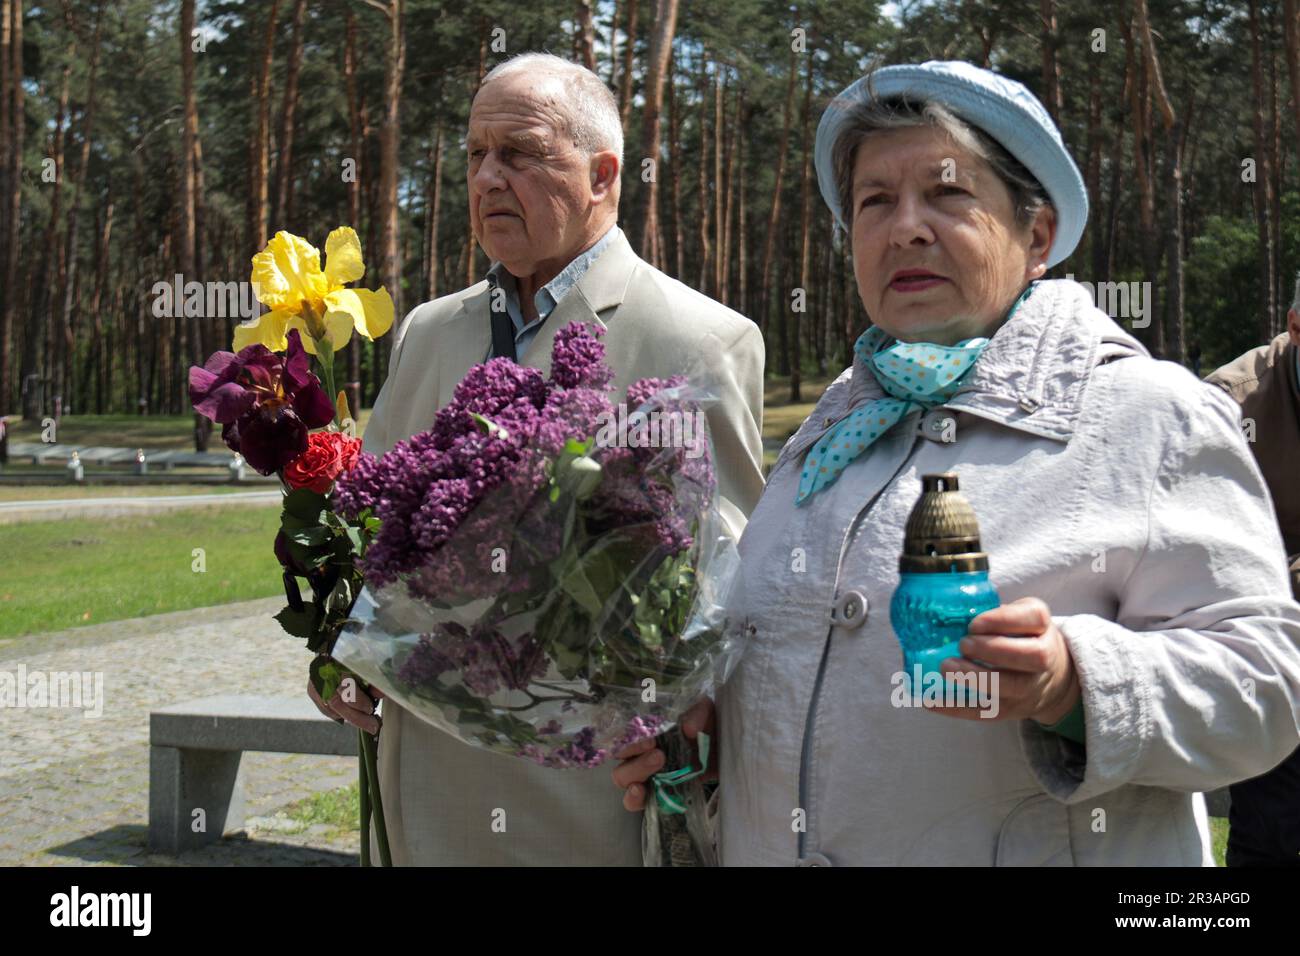 KYIV, UKRAINE - MAY 21, 2023 - A senior man and woman hold flowers and a vigil lantern at the Bykivnia Graves National Historical and Memorial Reserve Stock Photo